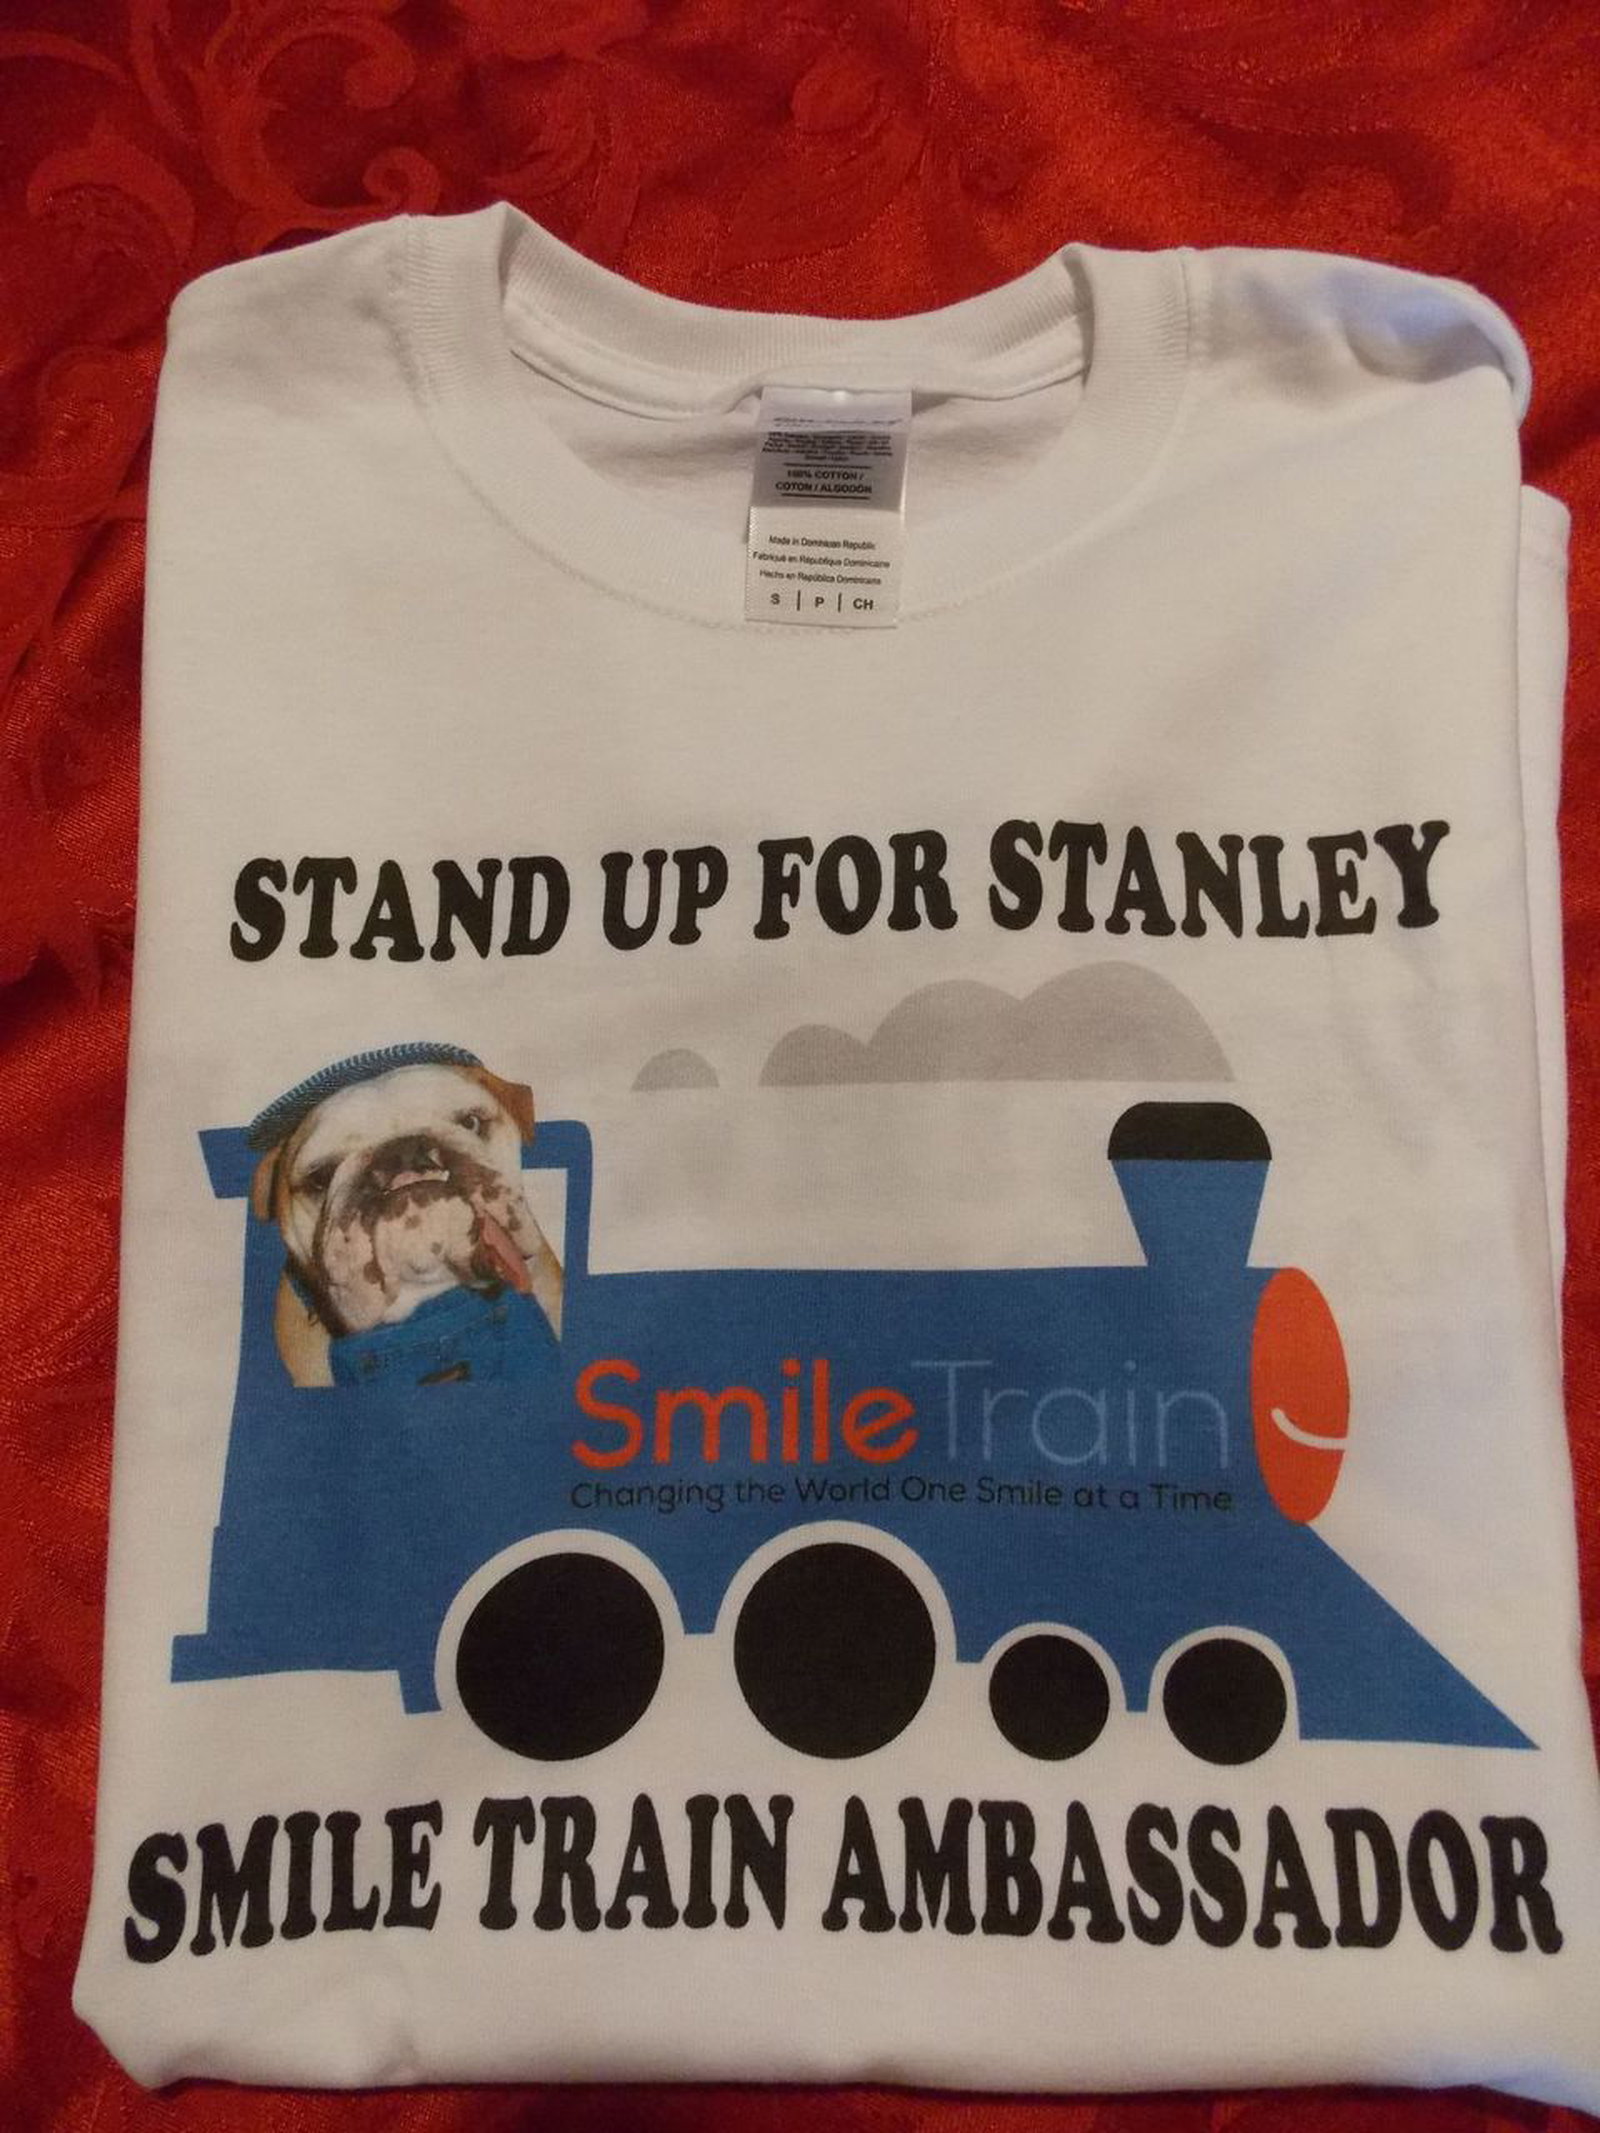 a t-shirt reading "stand up for stanley smile train ambassador"